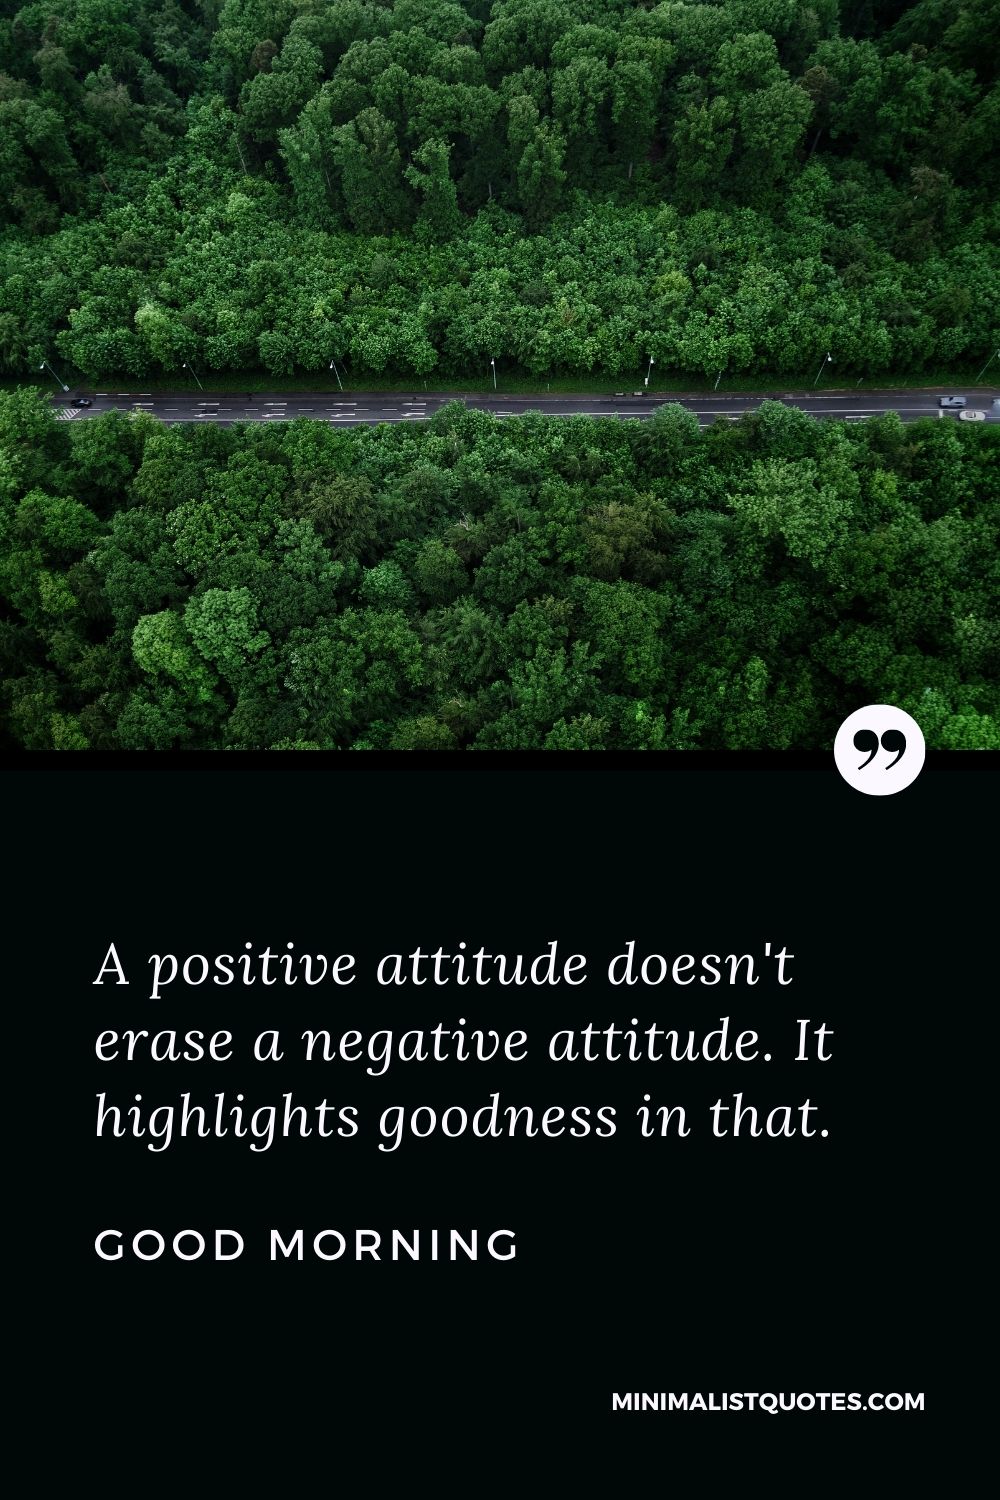 Good Morning Wish & Message With Image: A positive attitude doesn't erase a negative attitude. It highlights goodness in that.